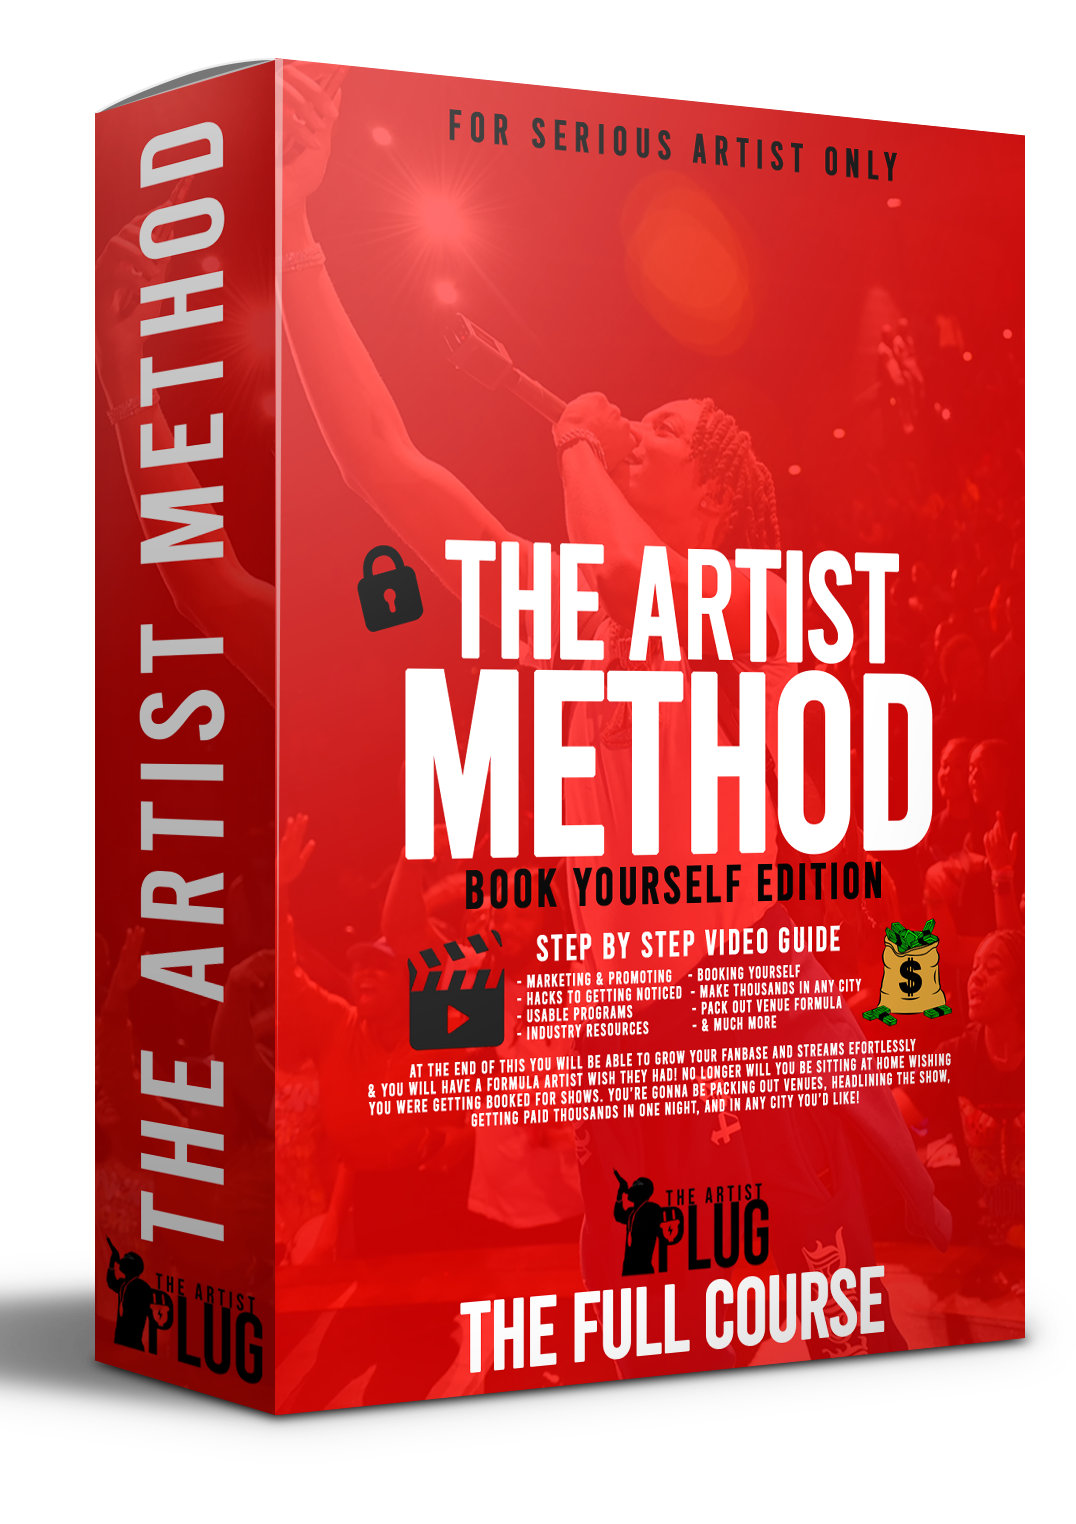 The Artist Method Full Course : The New Artist Marketing and Promotion Blueprint 2.0 (BOOK YOURSELF EDITION)